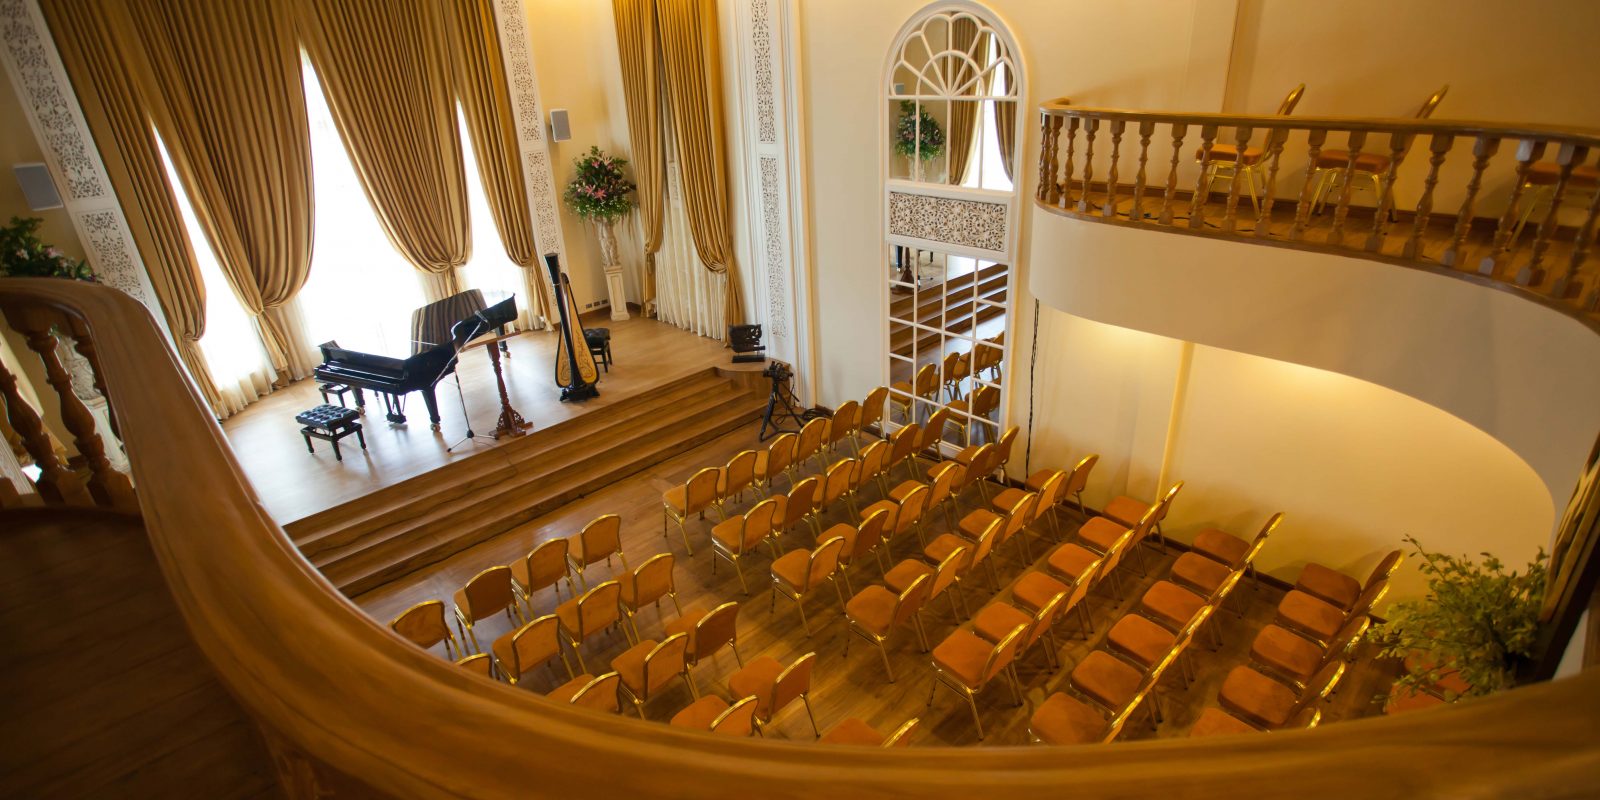 The Sala Sudasiri Sobha auditorium, seen from the balcony. The concert hall is part of the Nat Studio Music School in Bangkok, Thailand, founded by Nat and Pawongduen 